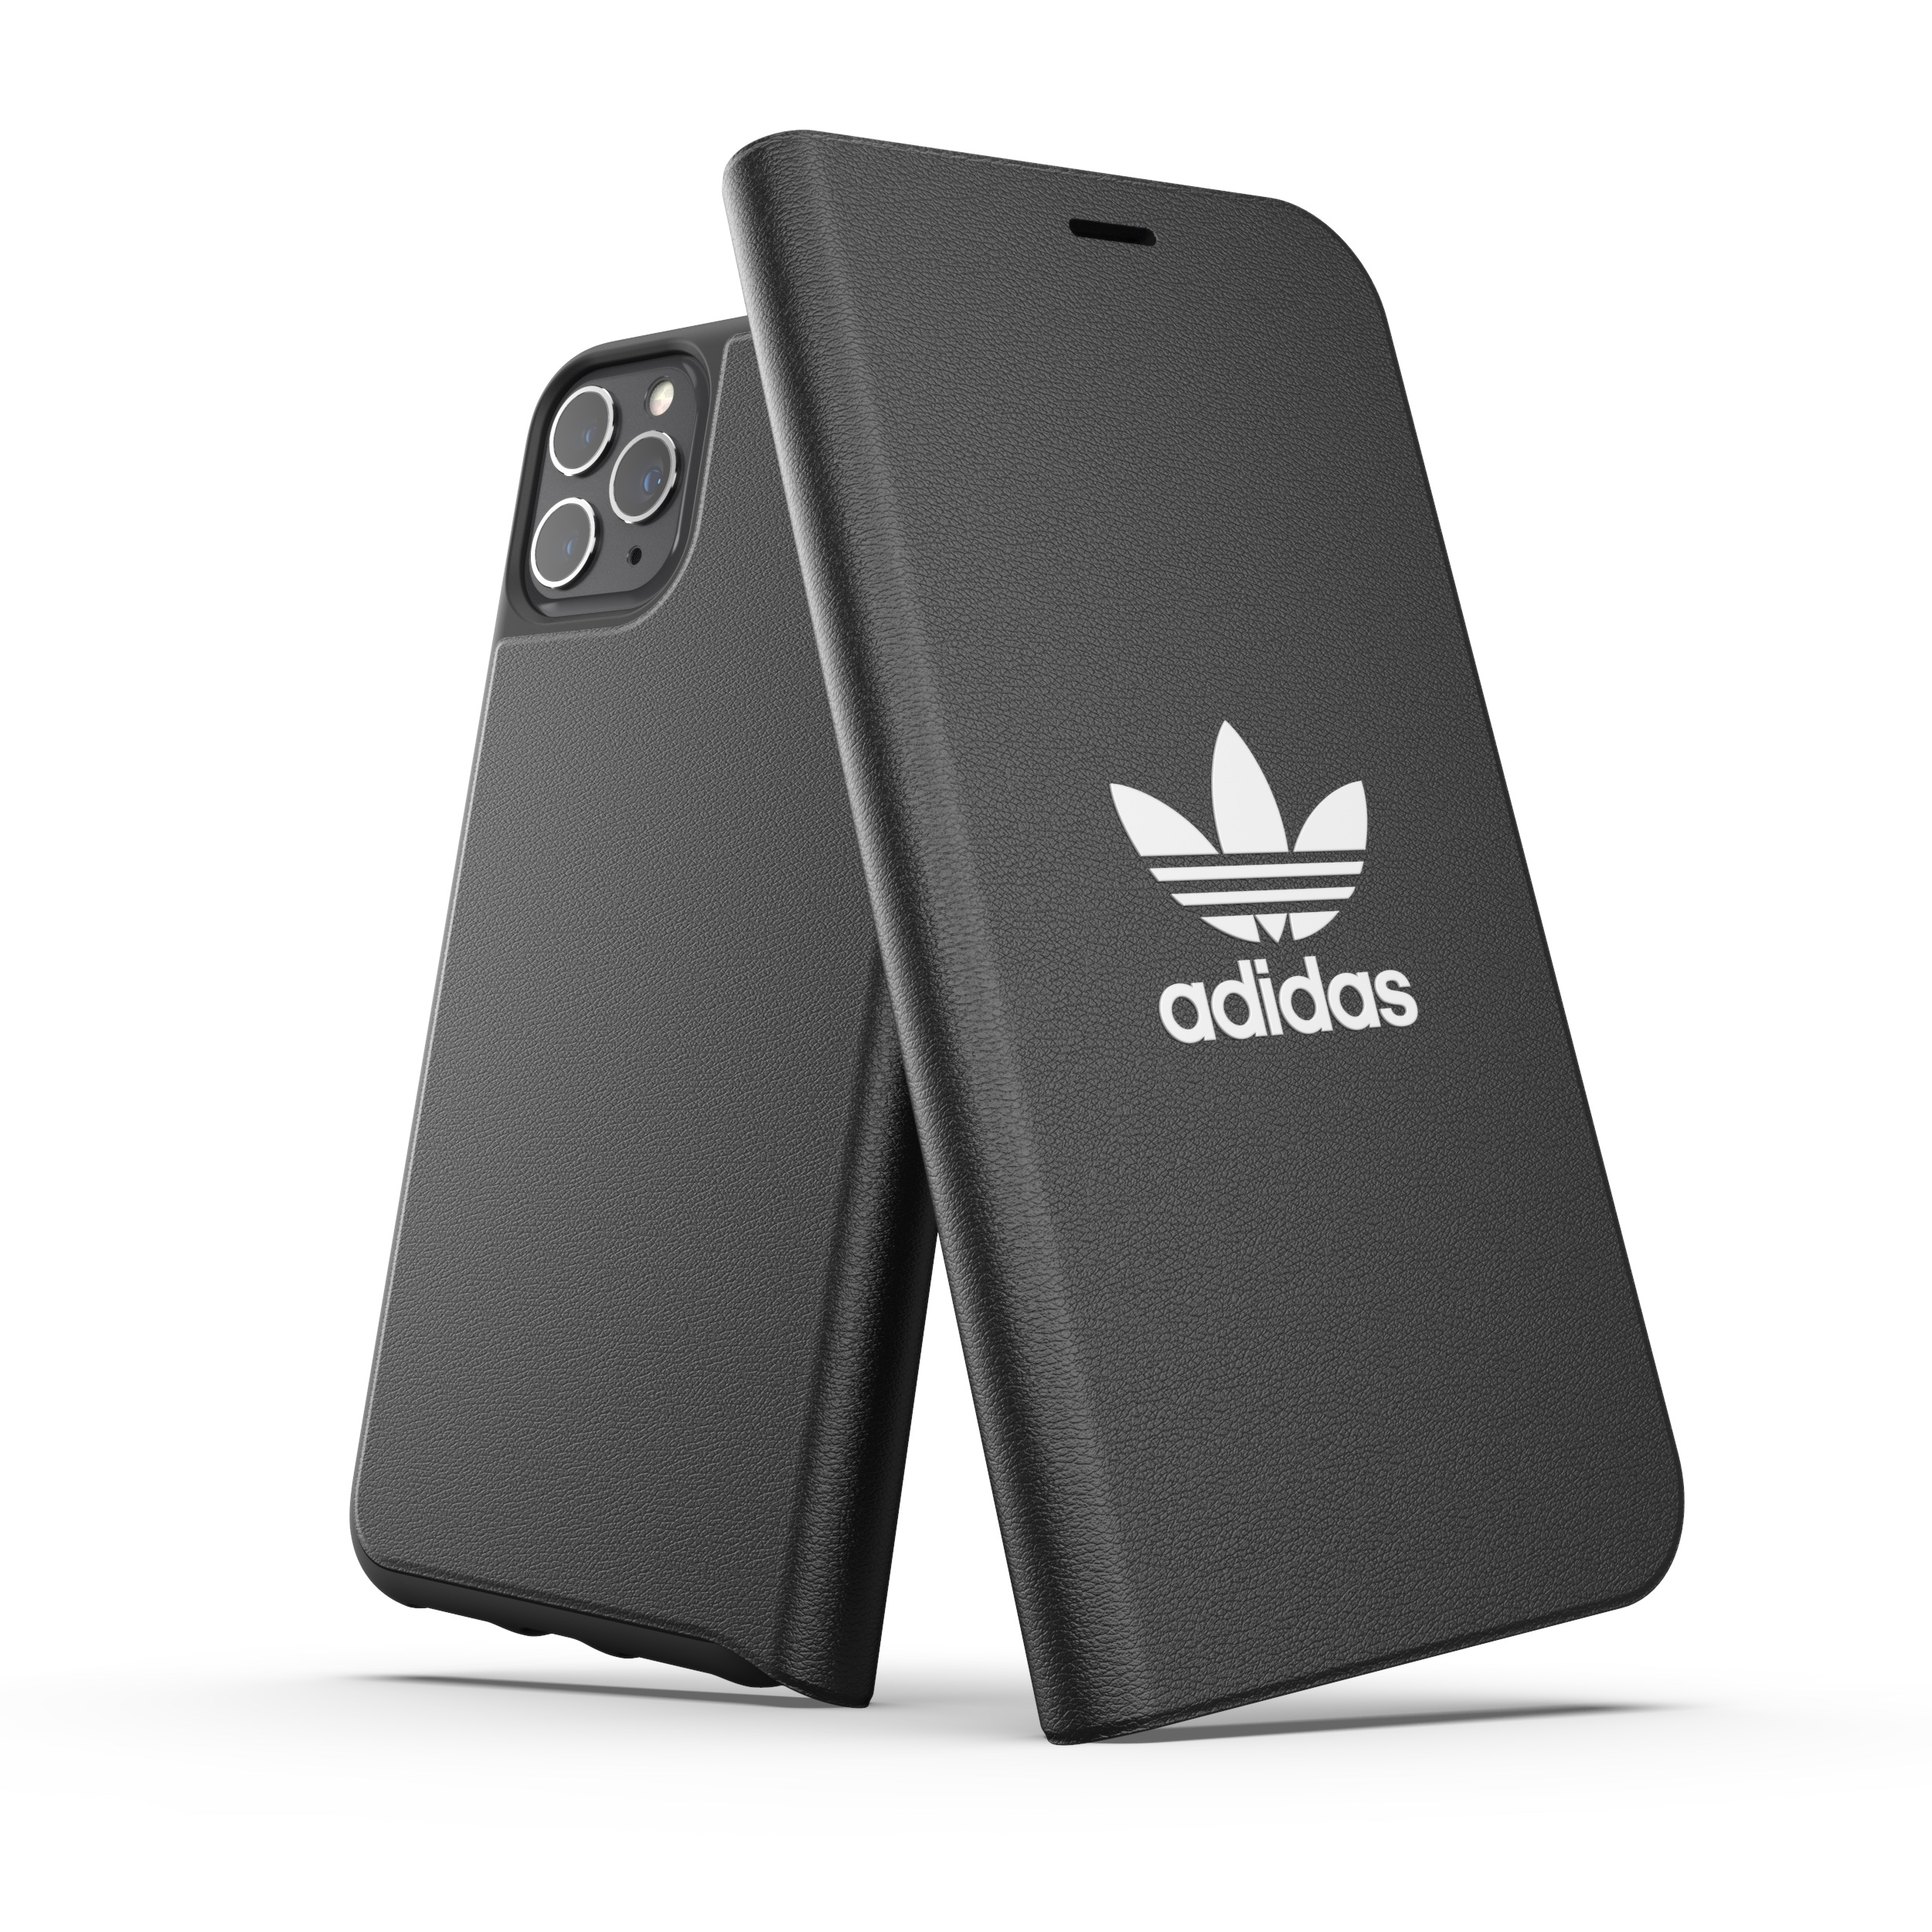 11 BLACK BASIC, IPHONE Bookcover, ADIDAS PRO Booklet MAX, APPLE, Case